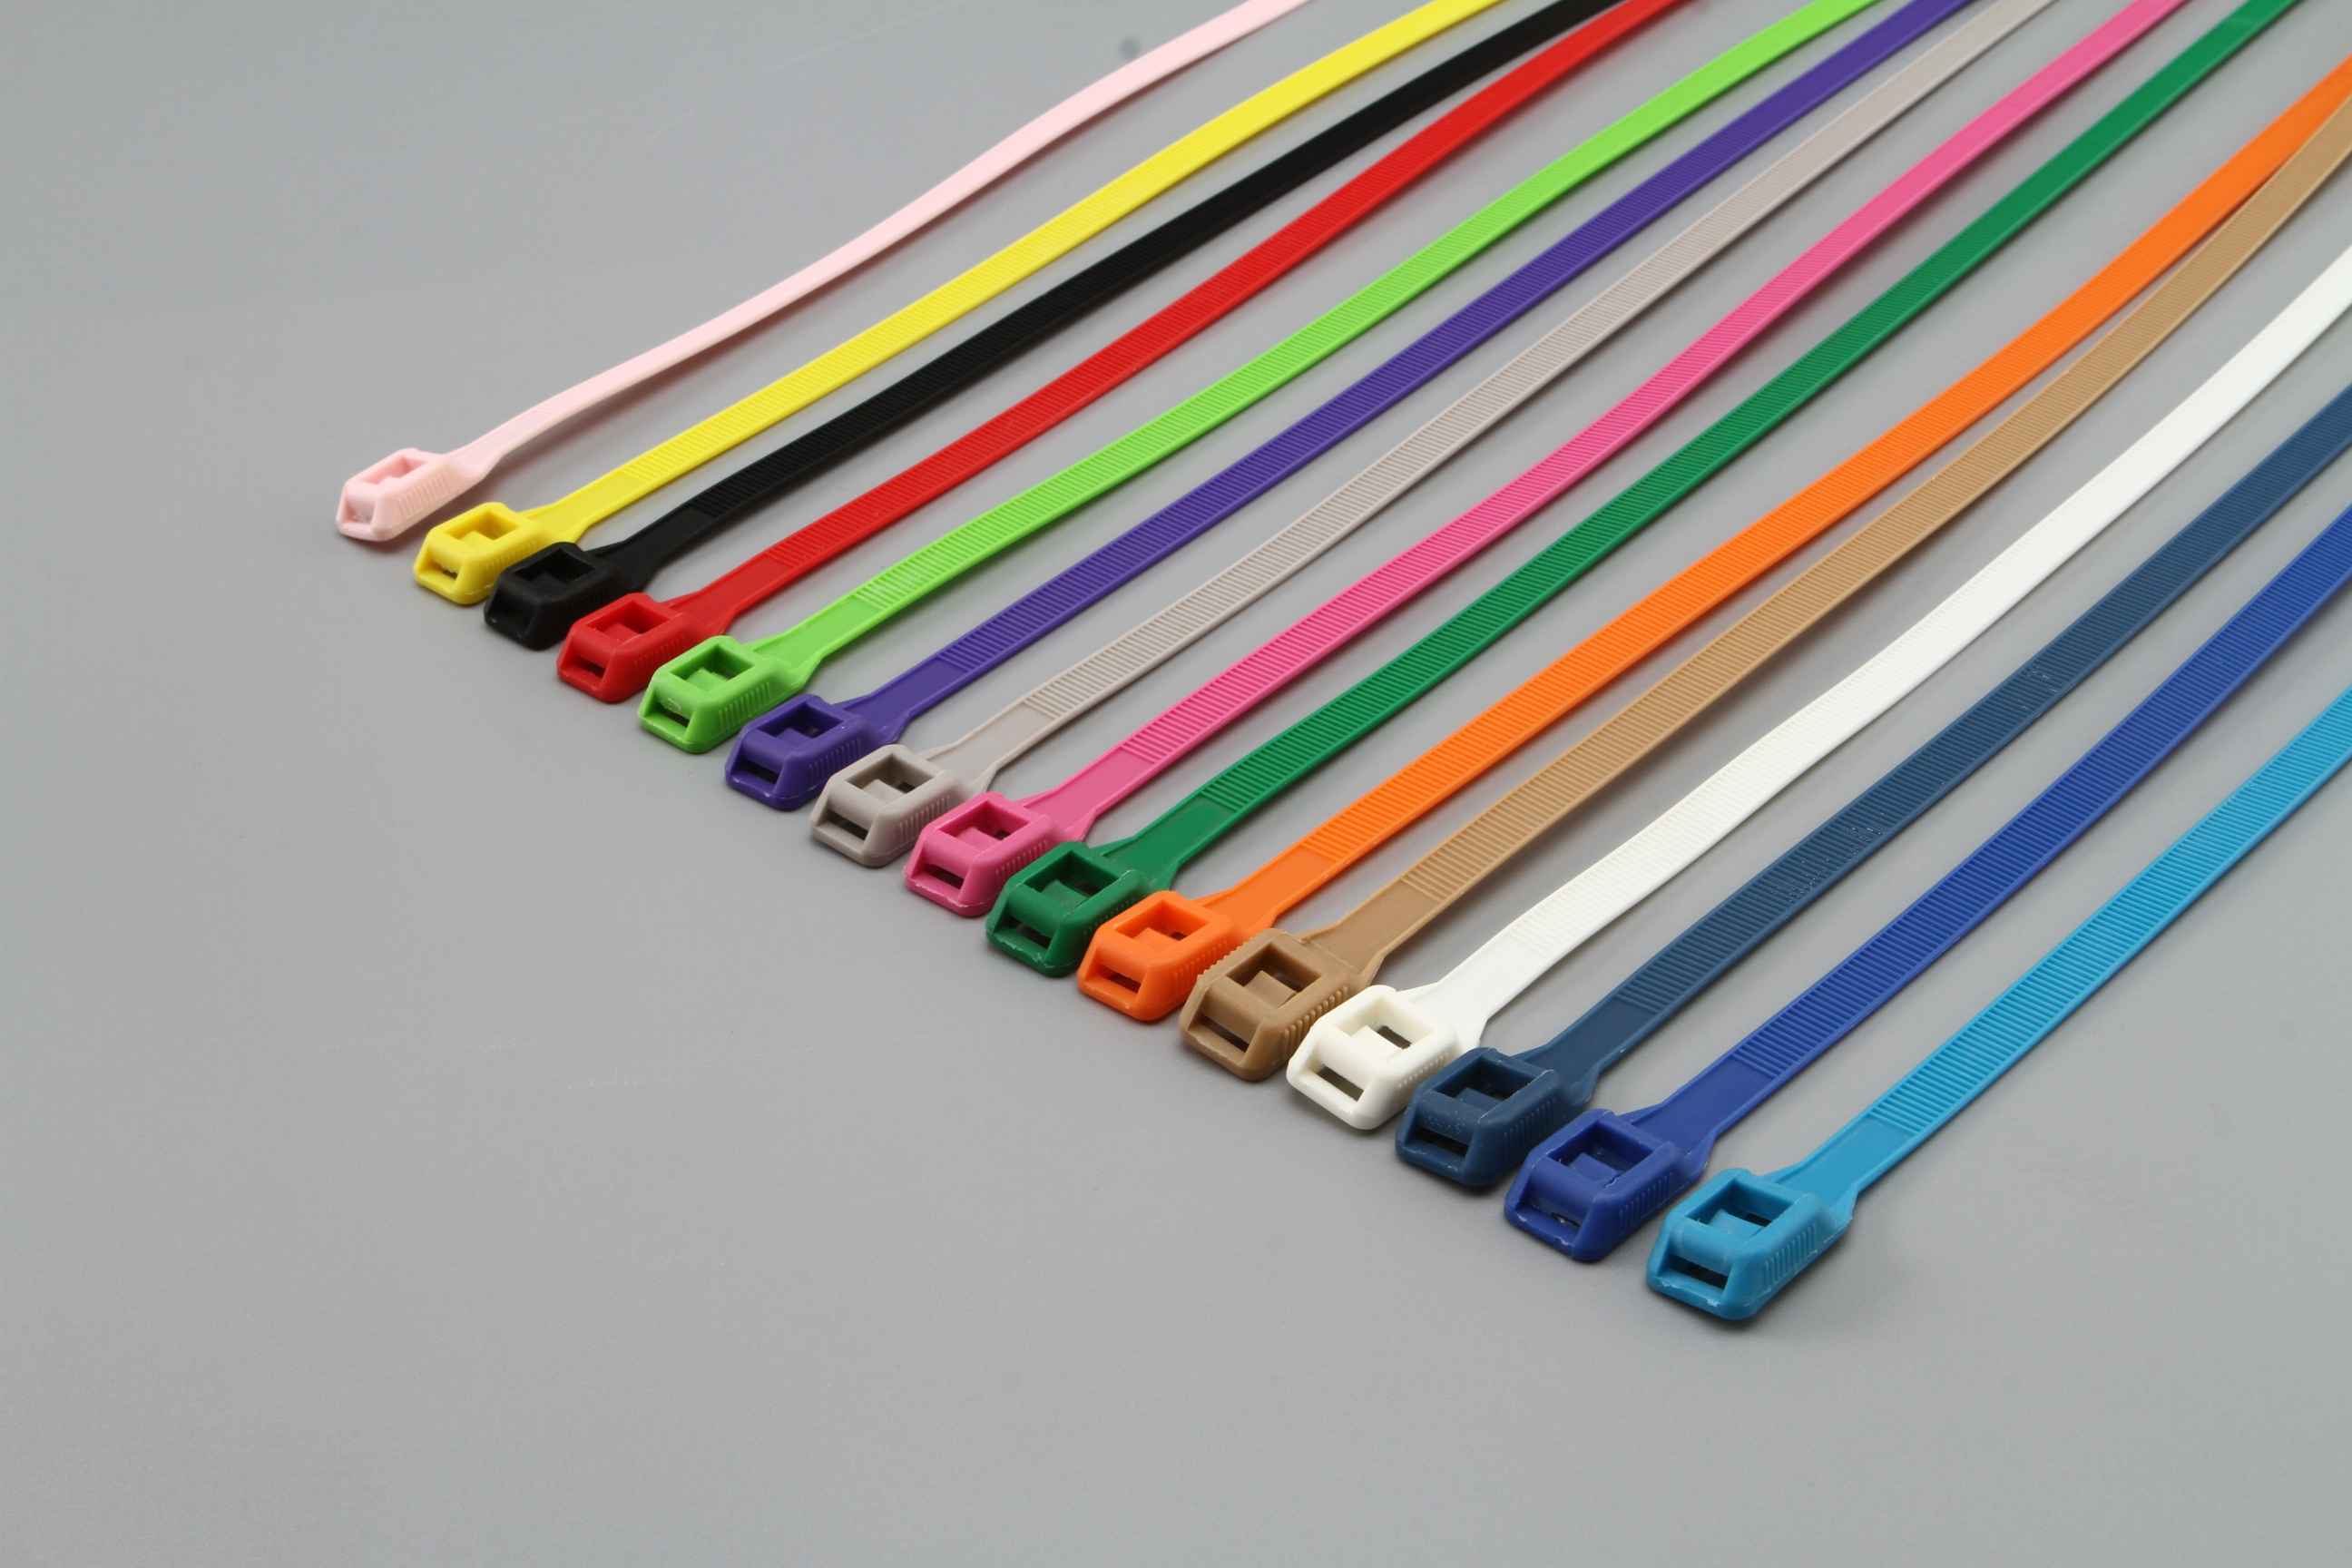 Latch cable tie - 2 